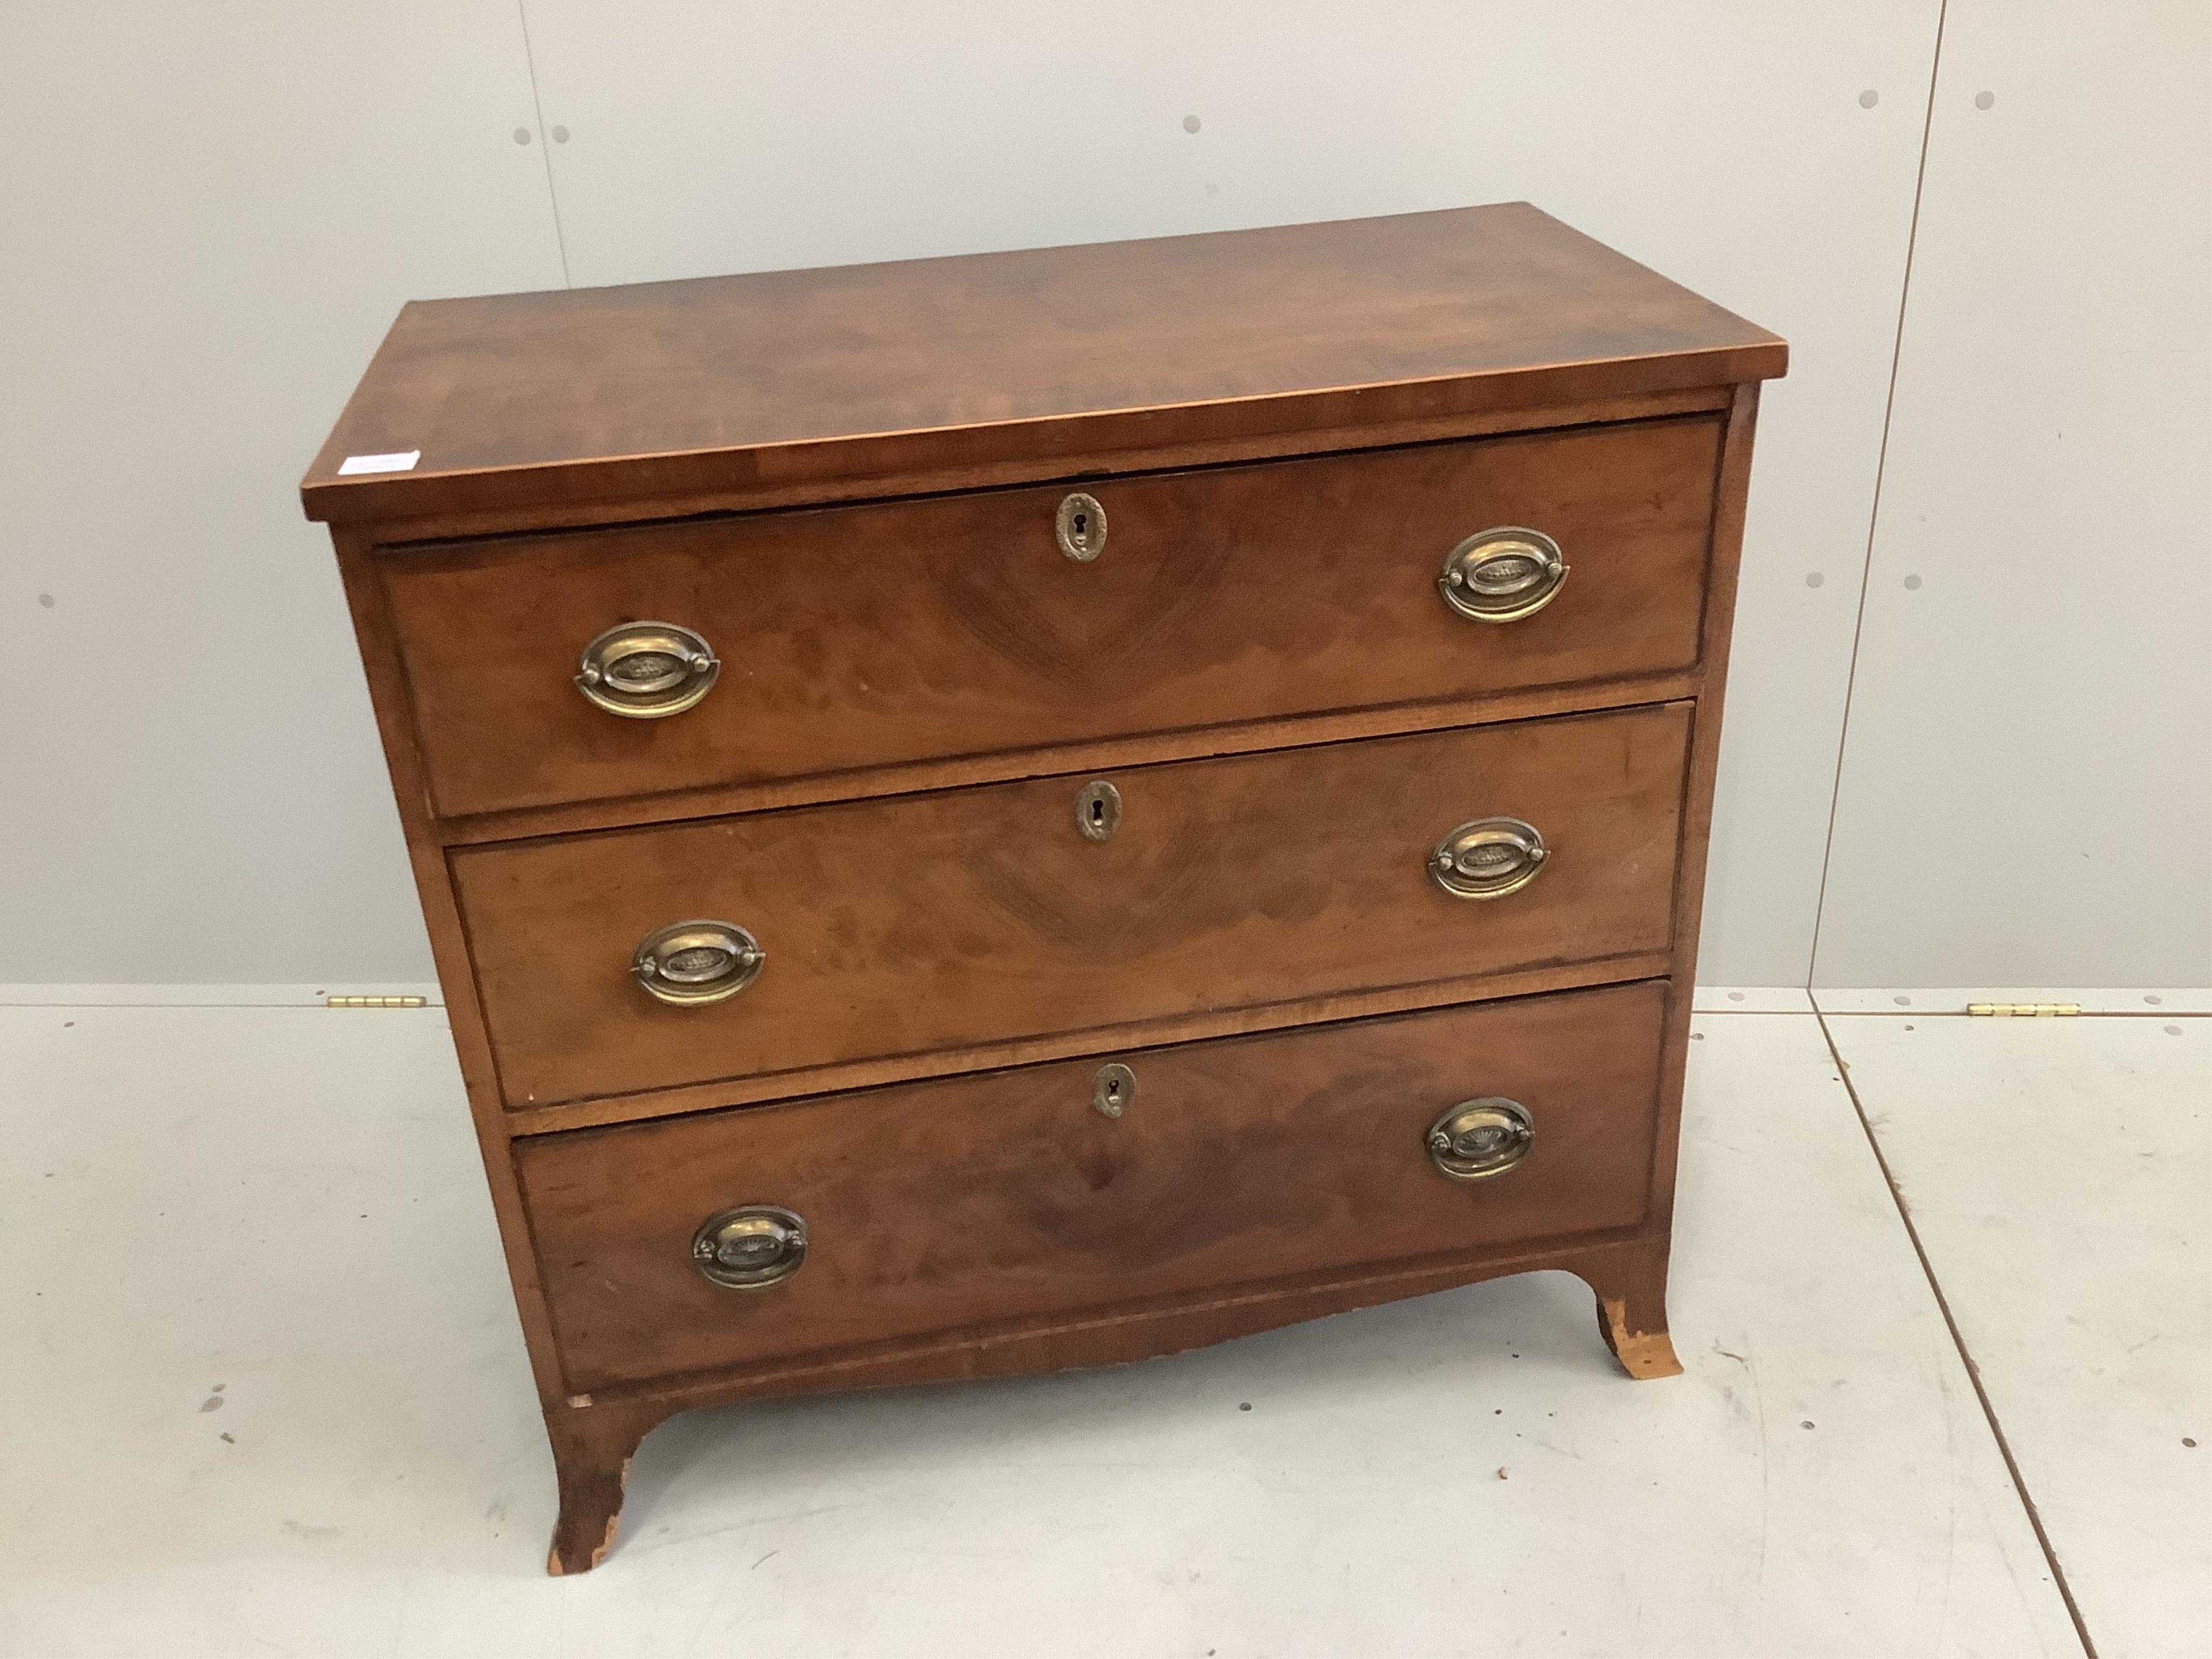 A George IV mahogany chest of three drawers, width 88cm, depth 46cm, height 85cm. Condition - fair